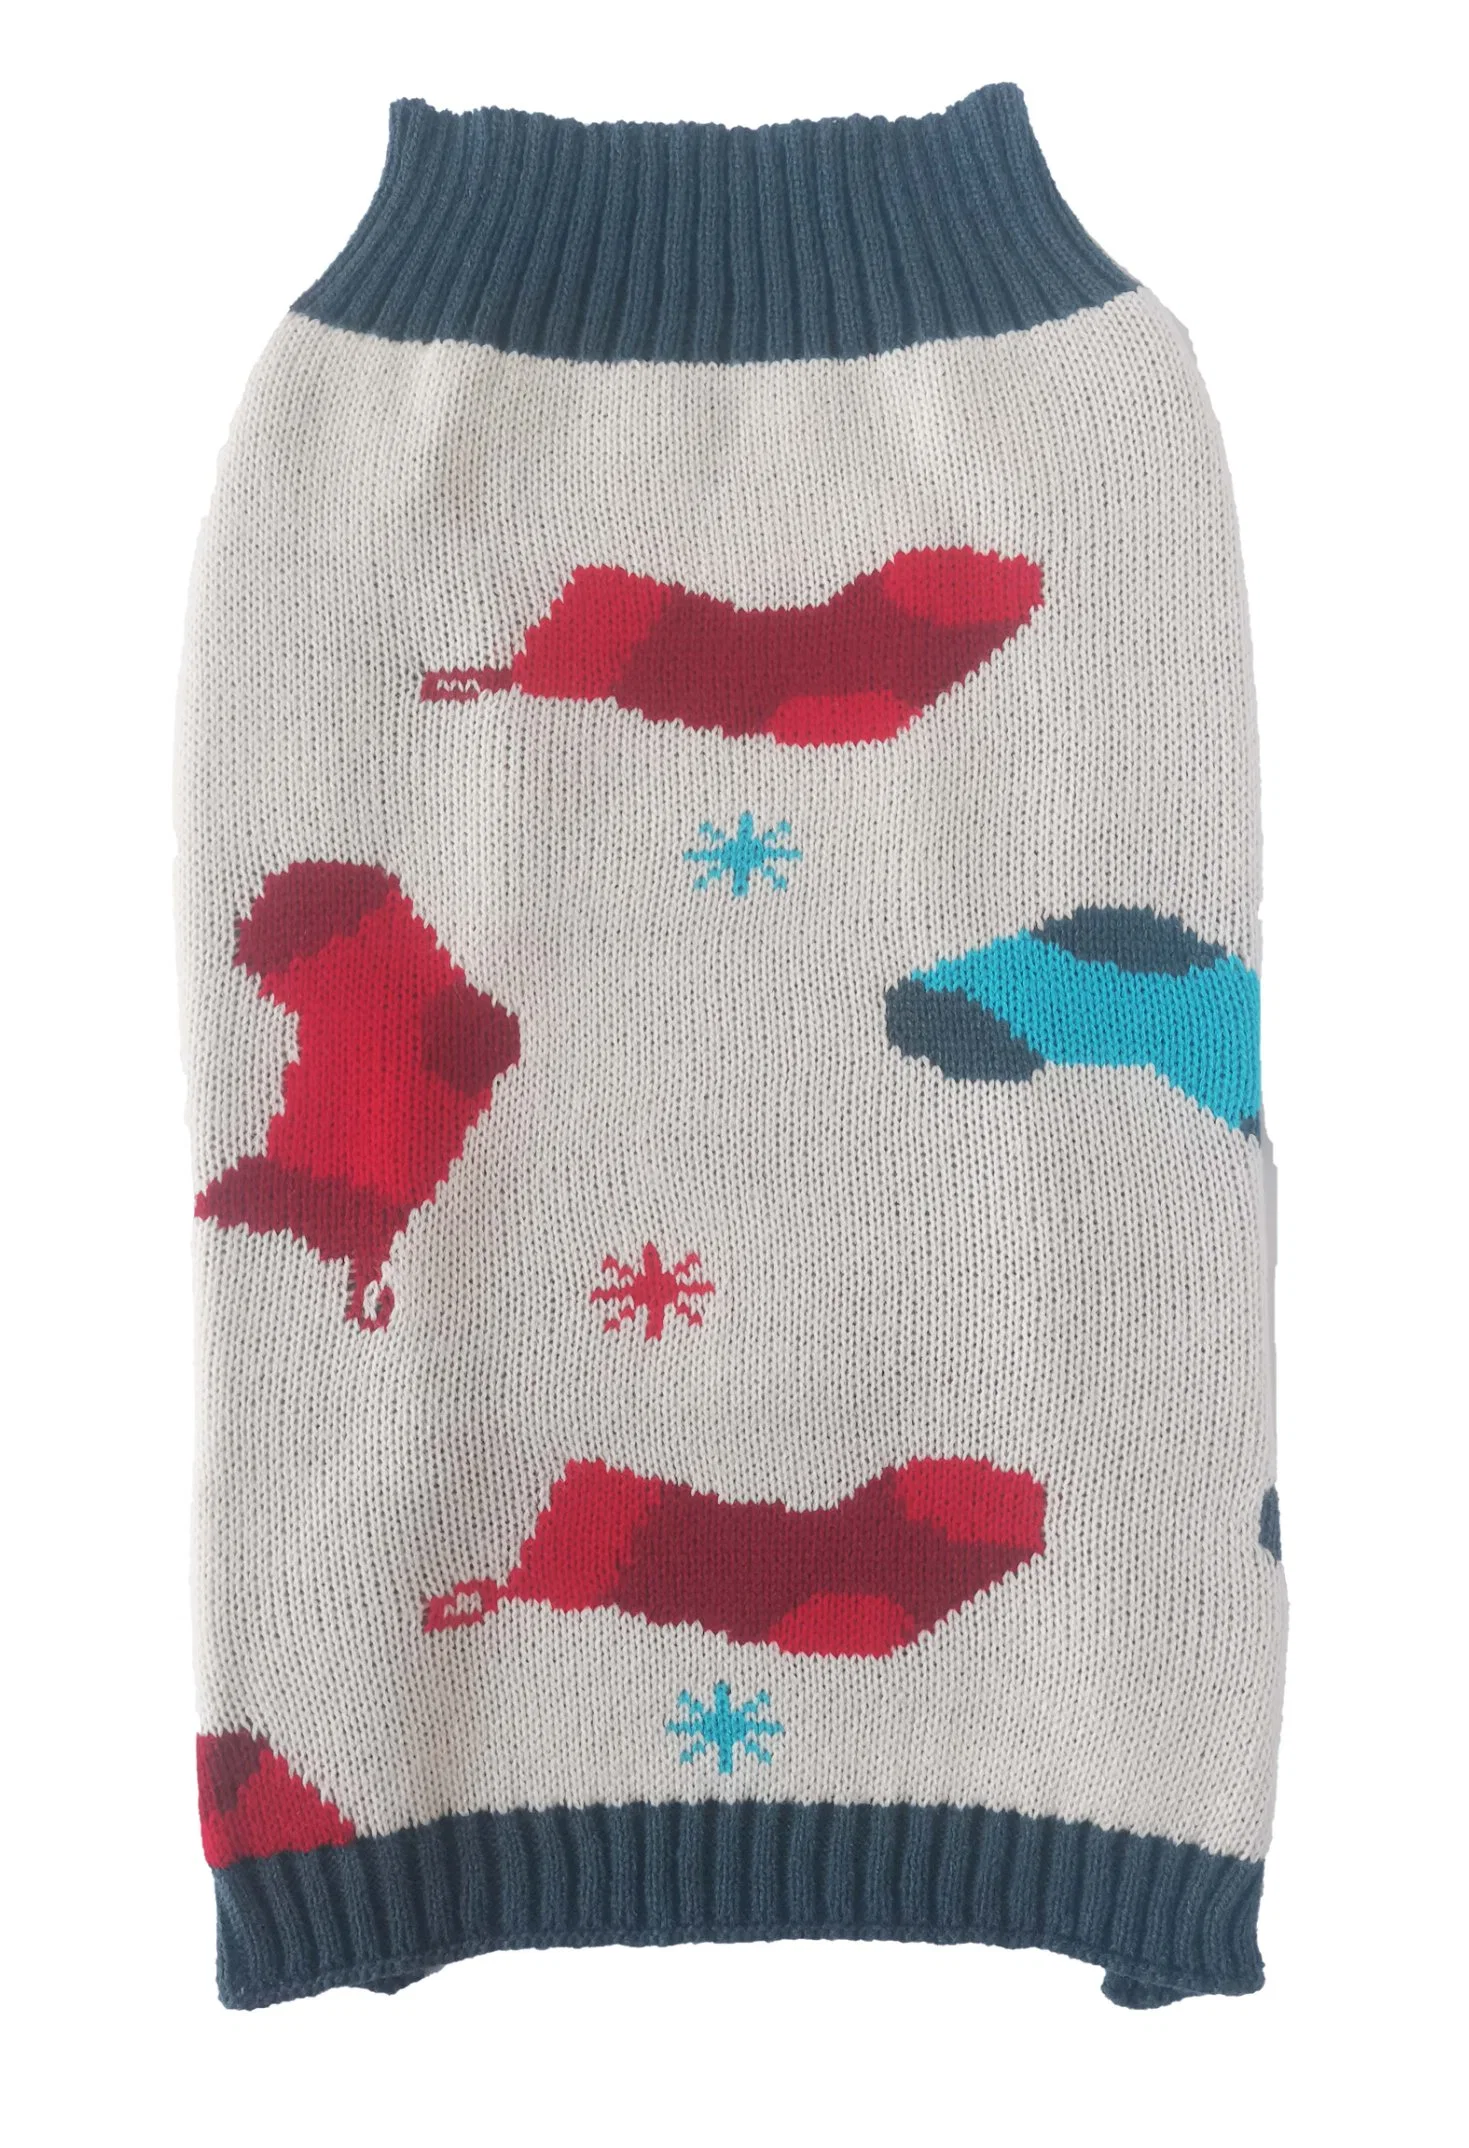 Winter Christmas Holiday Socks Dog Pet Jacquard Knitted Sweater Apparel